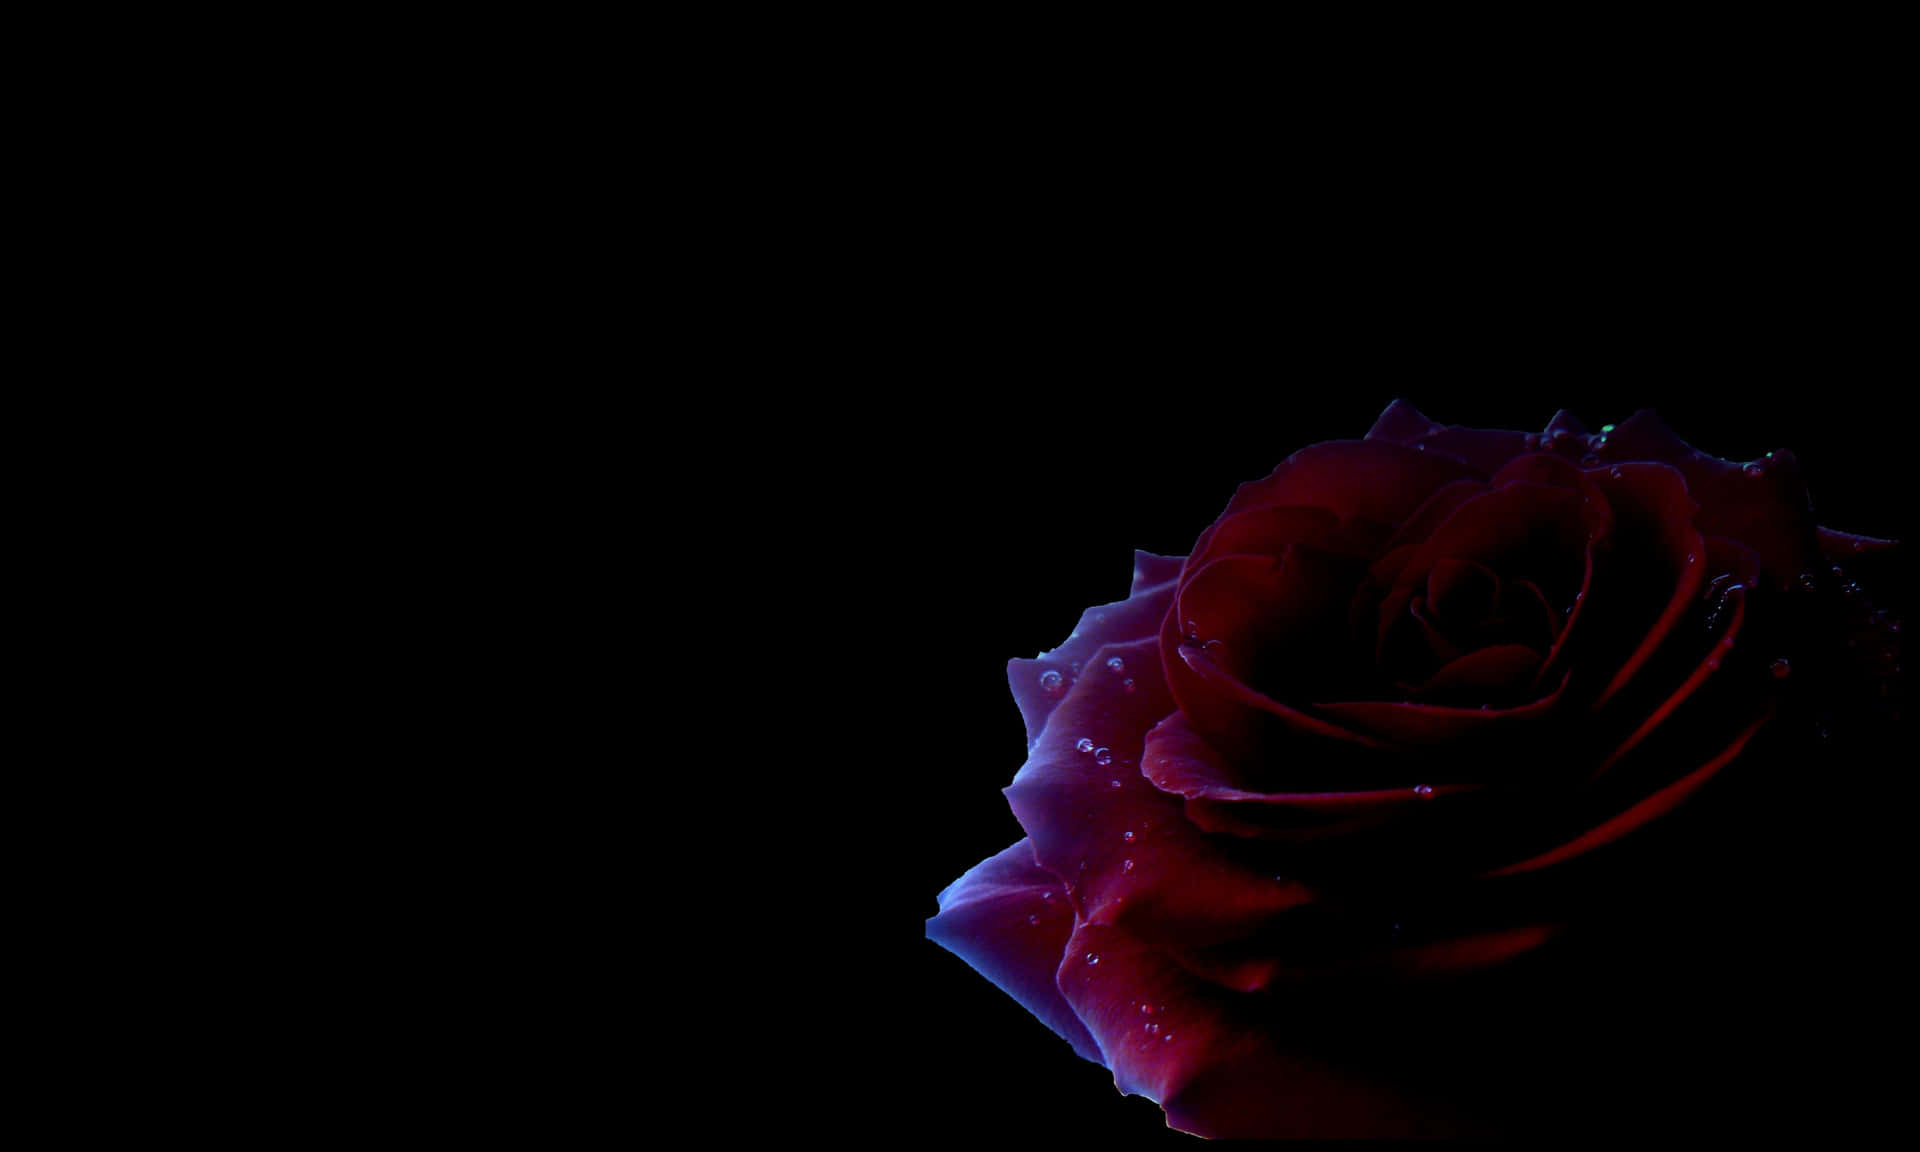 A striking black rose in all its dark, mysterious beauty Wallpaper